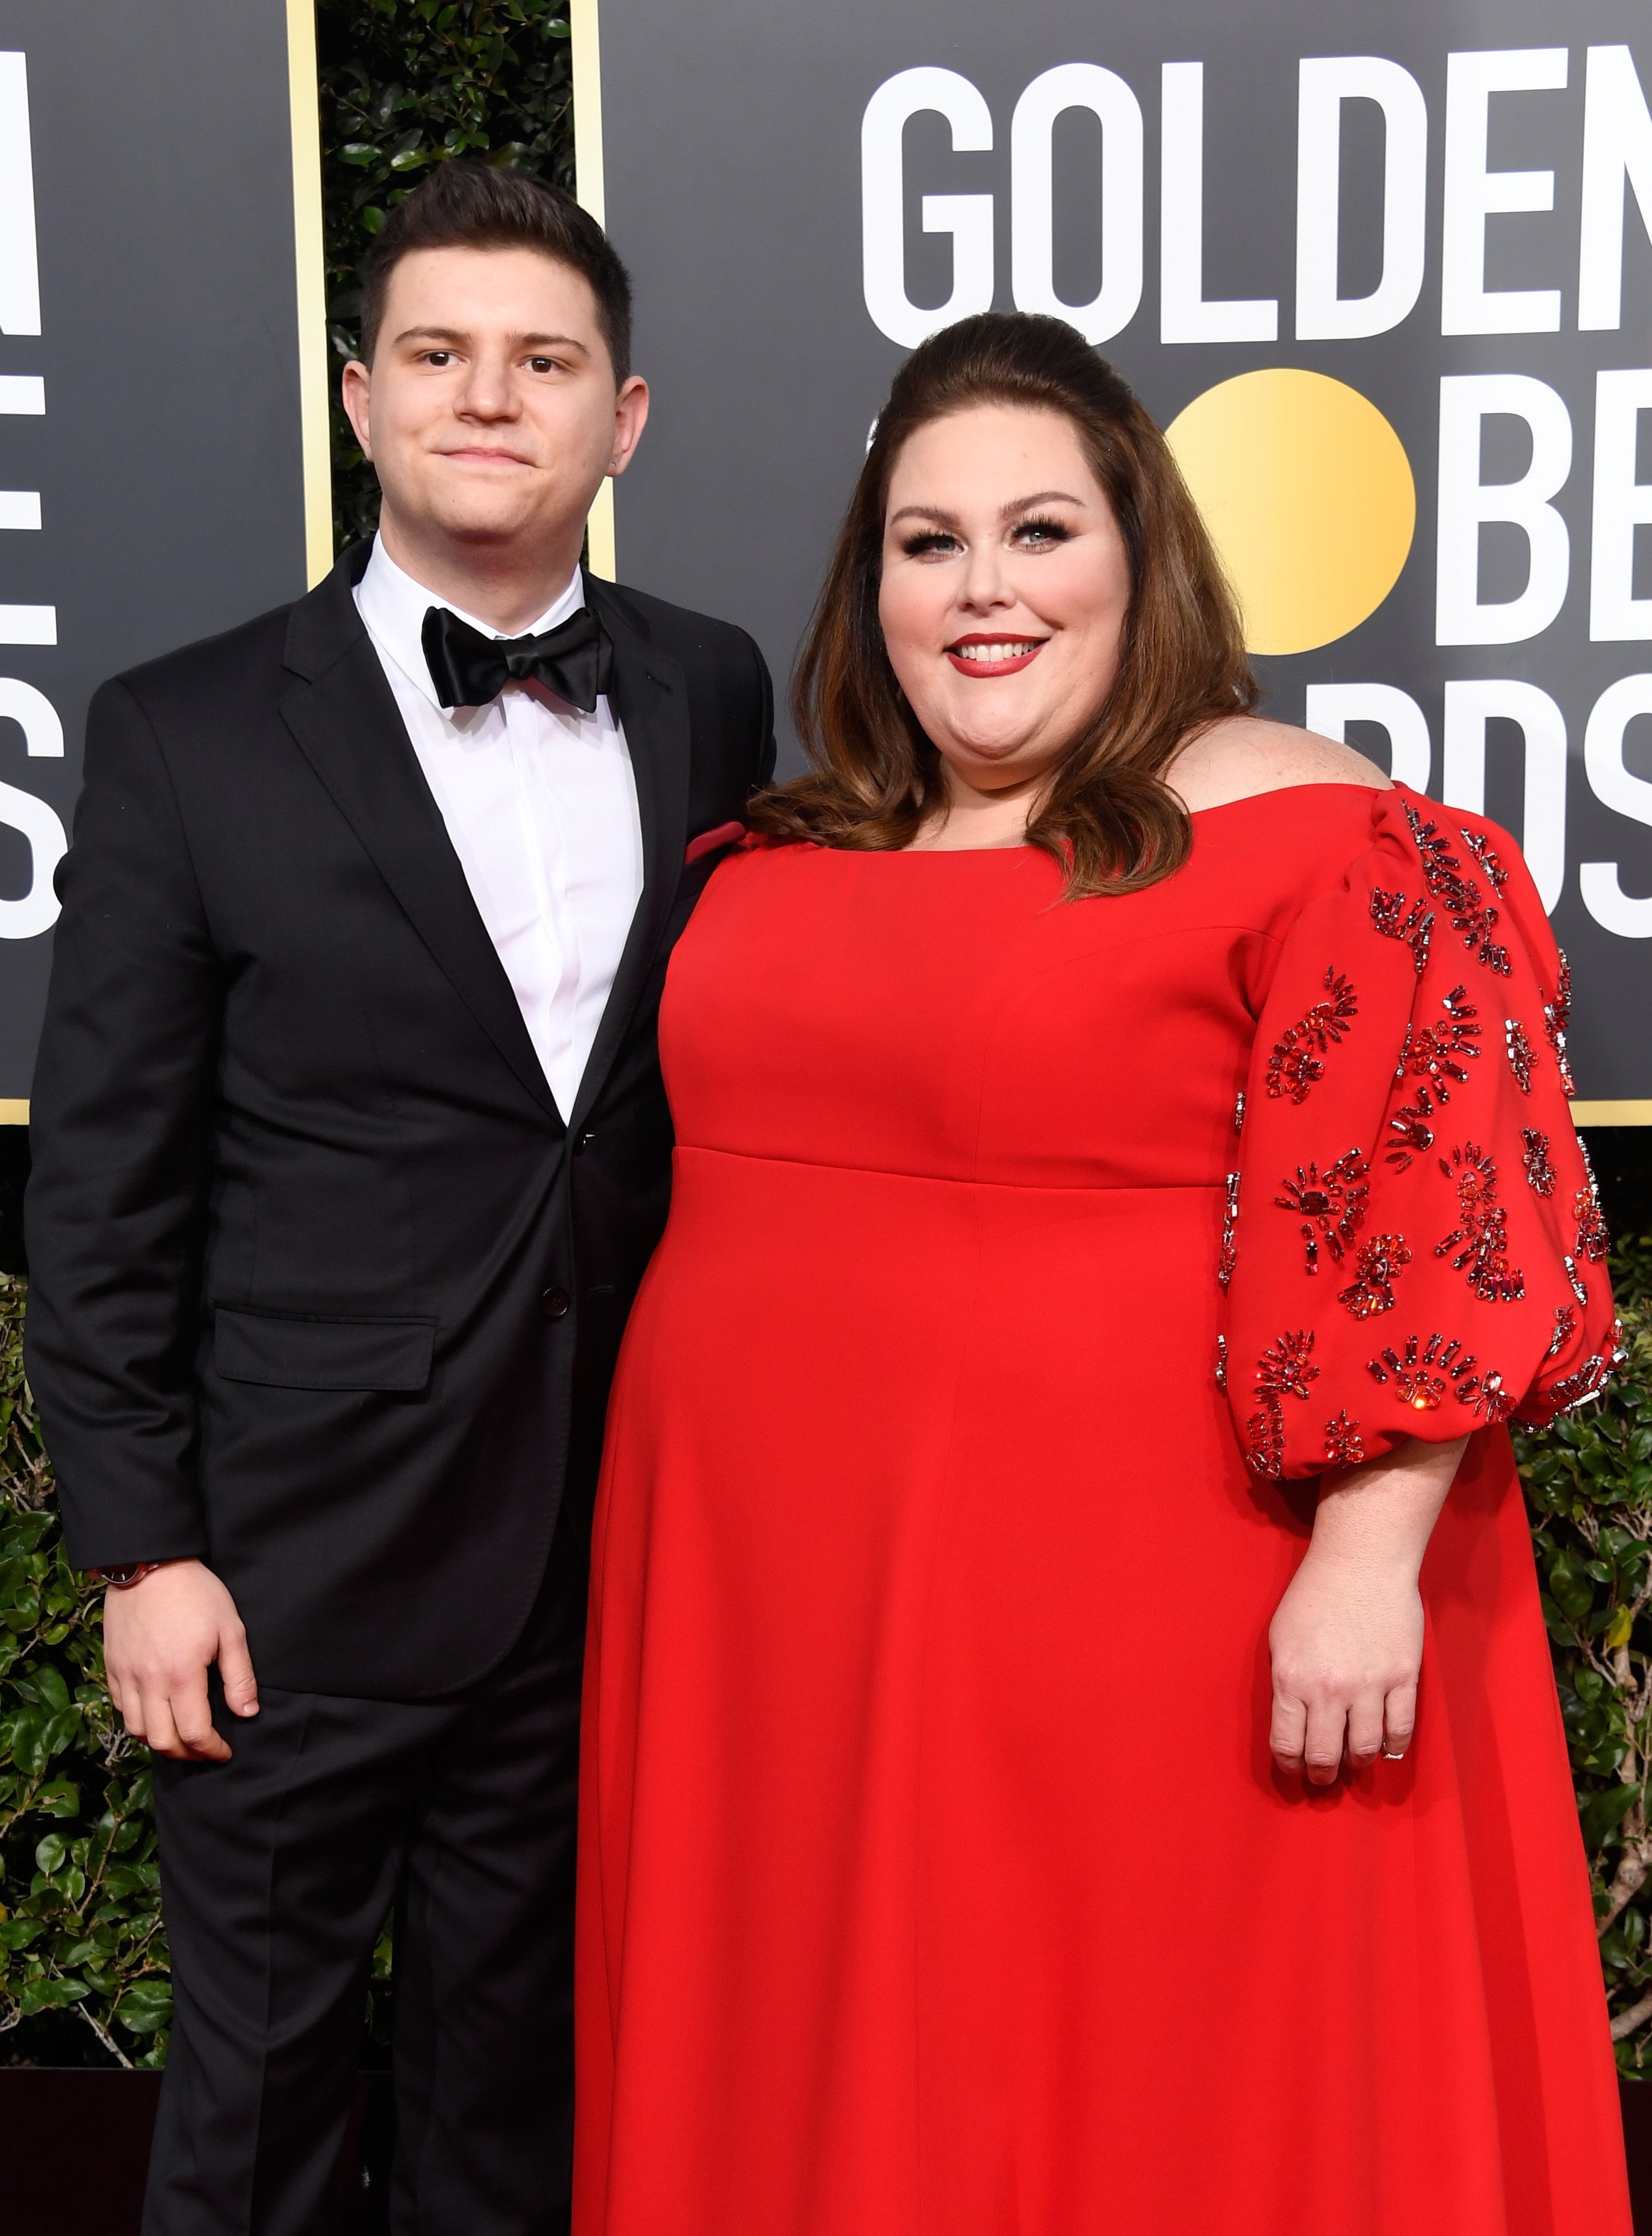 Chrissy Metz and Hal Rosenfield attend the 2019 Golden Globe Awards | Photo: Getty Images